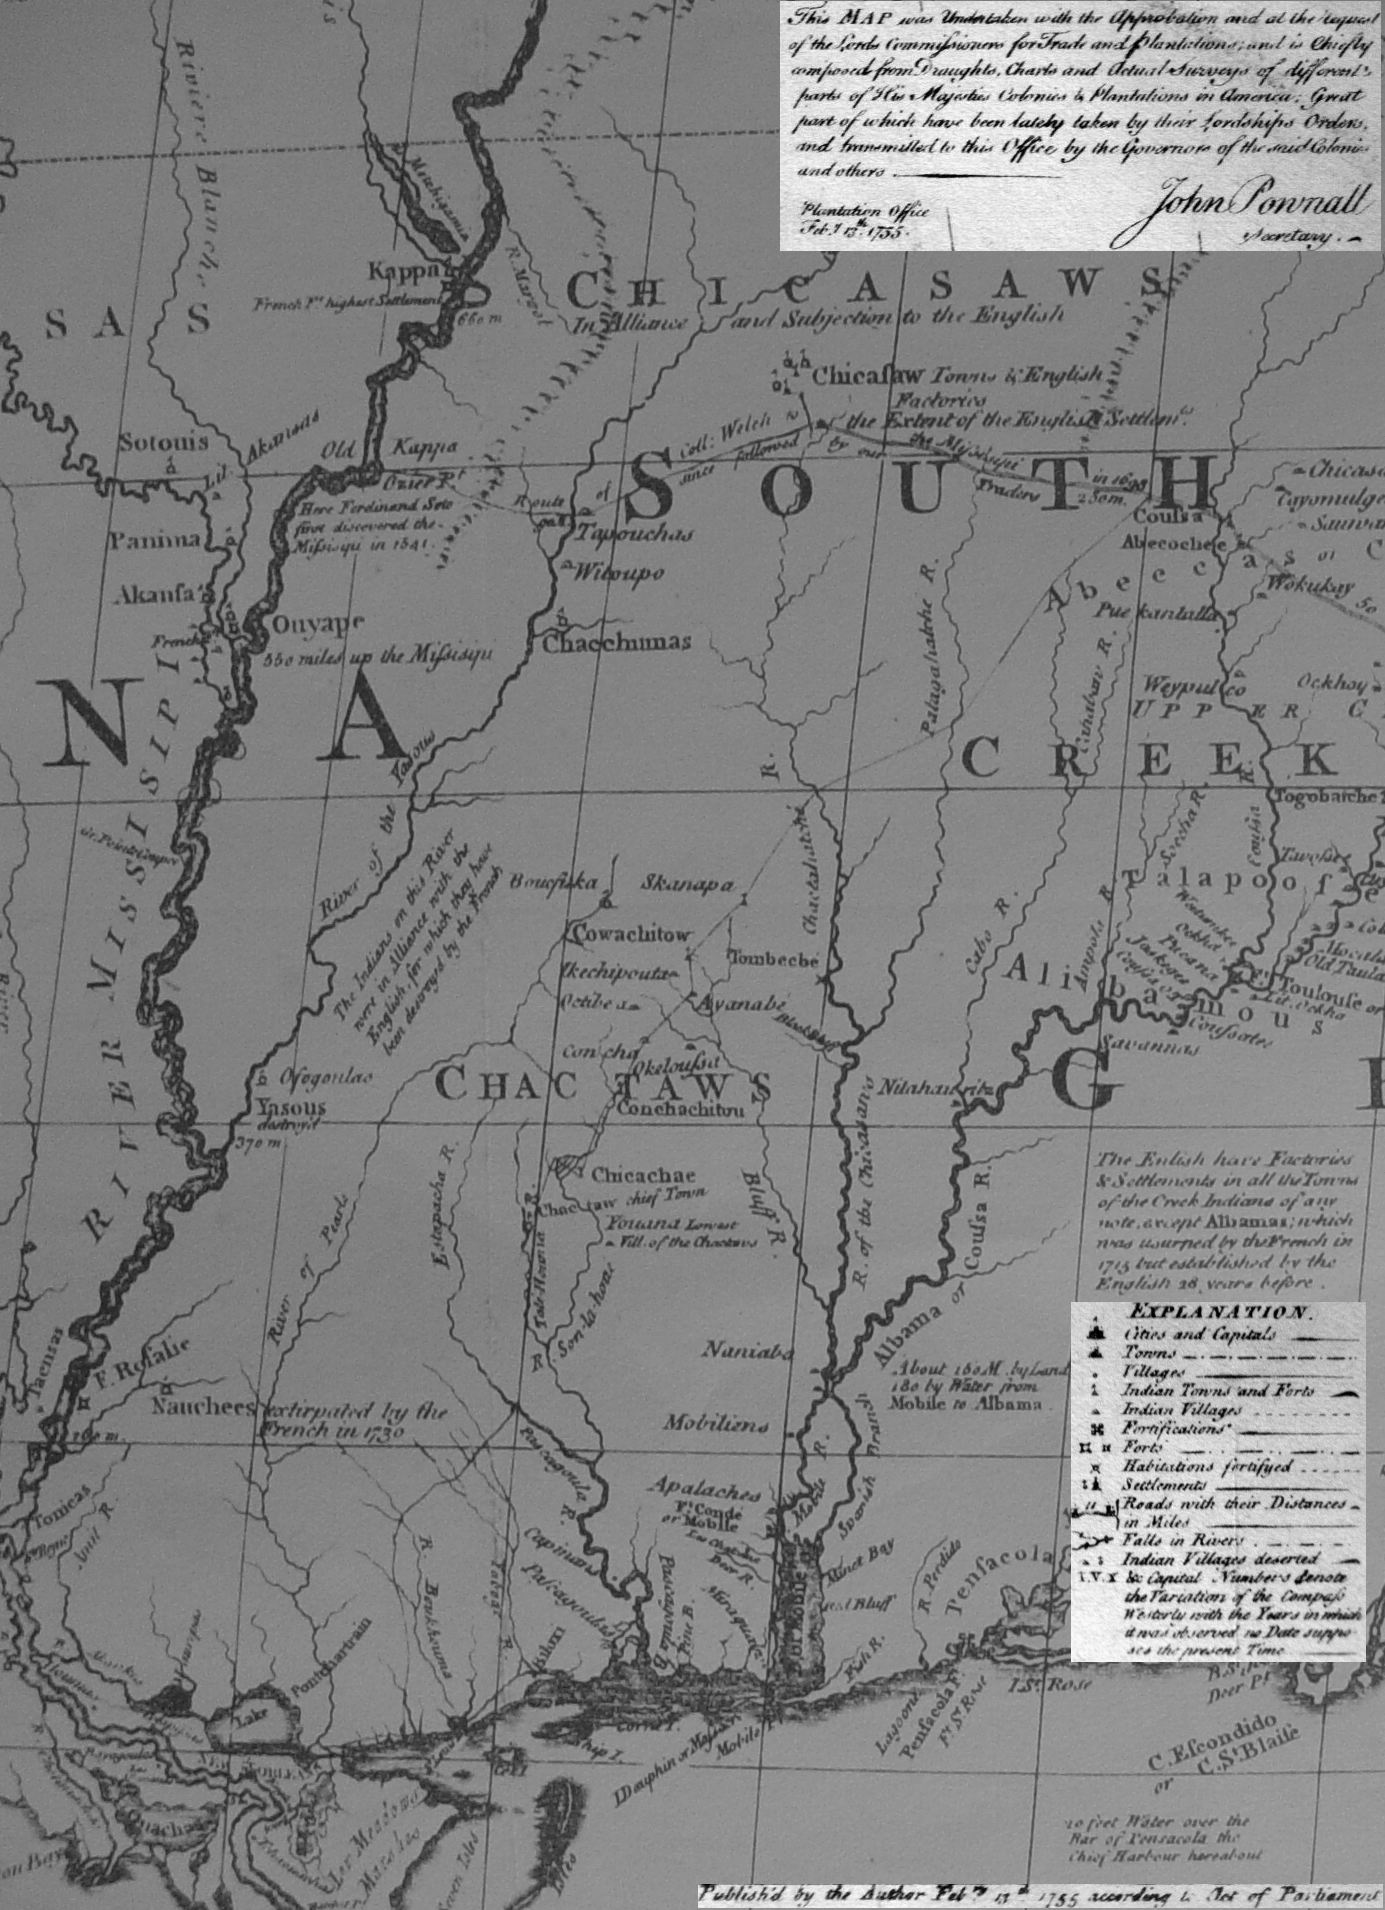 Old Historical City, County and State Maps of Mississippi